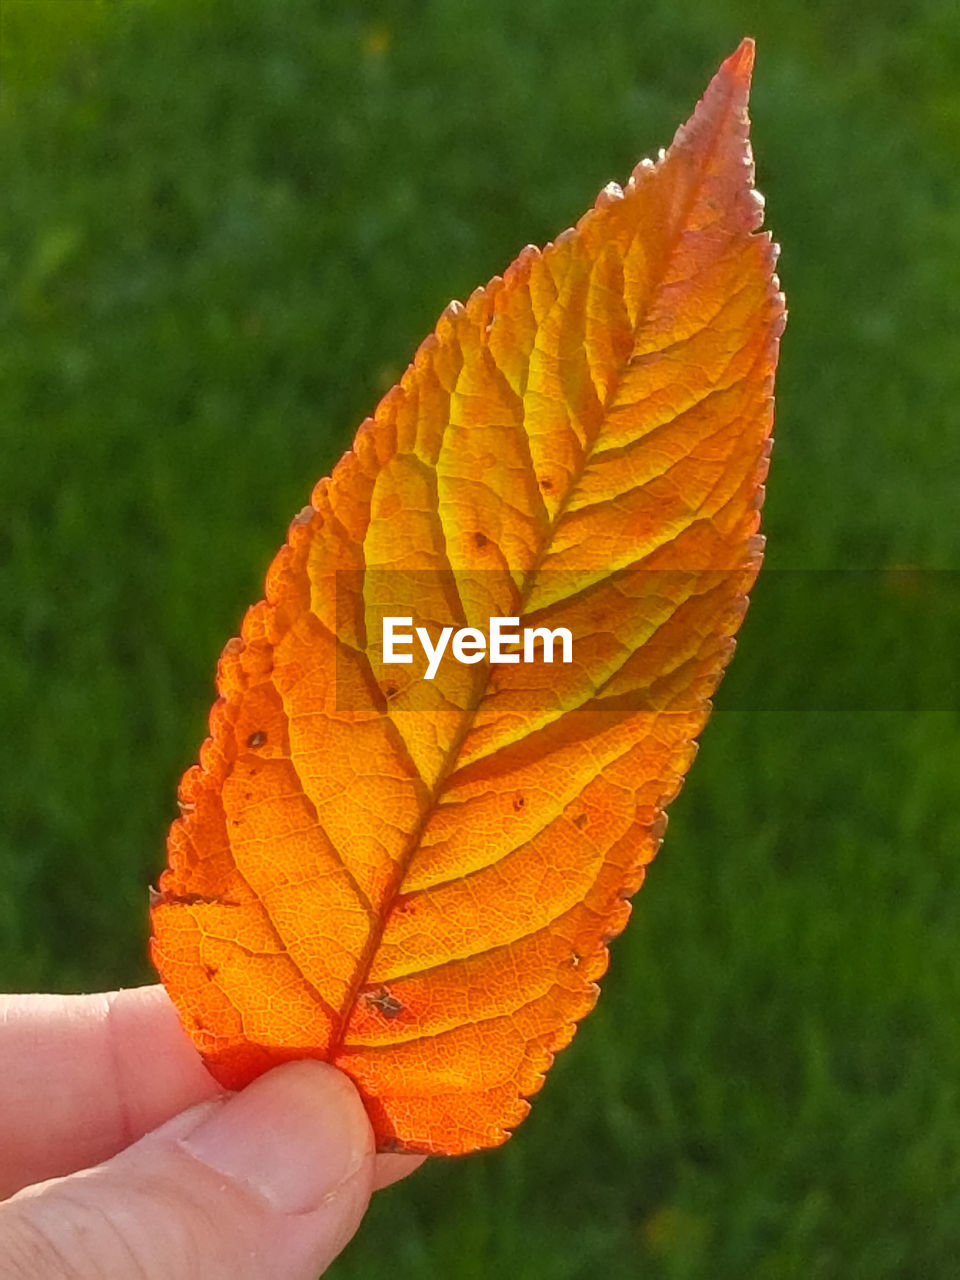 CLOSE-UP OF HAND HOLDING MAPLE LEAF ON LEAVES